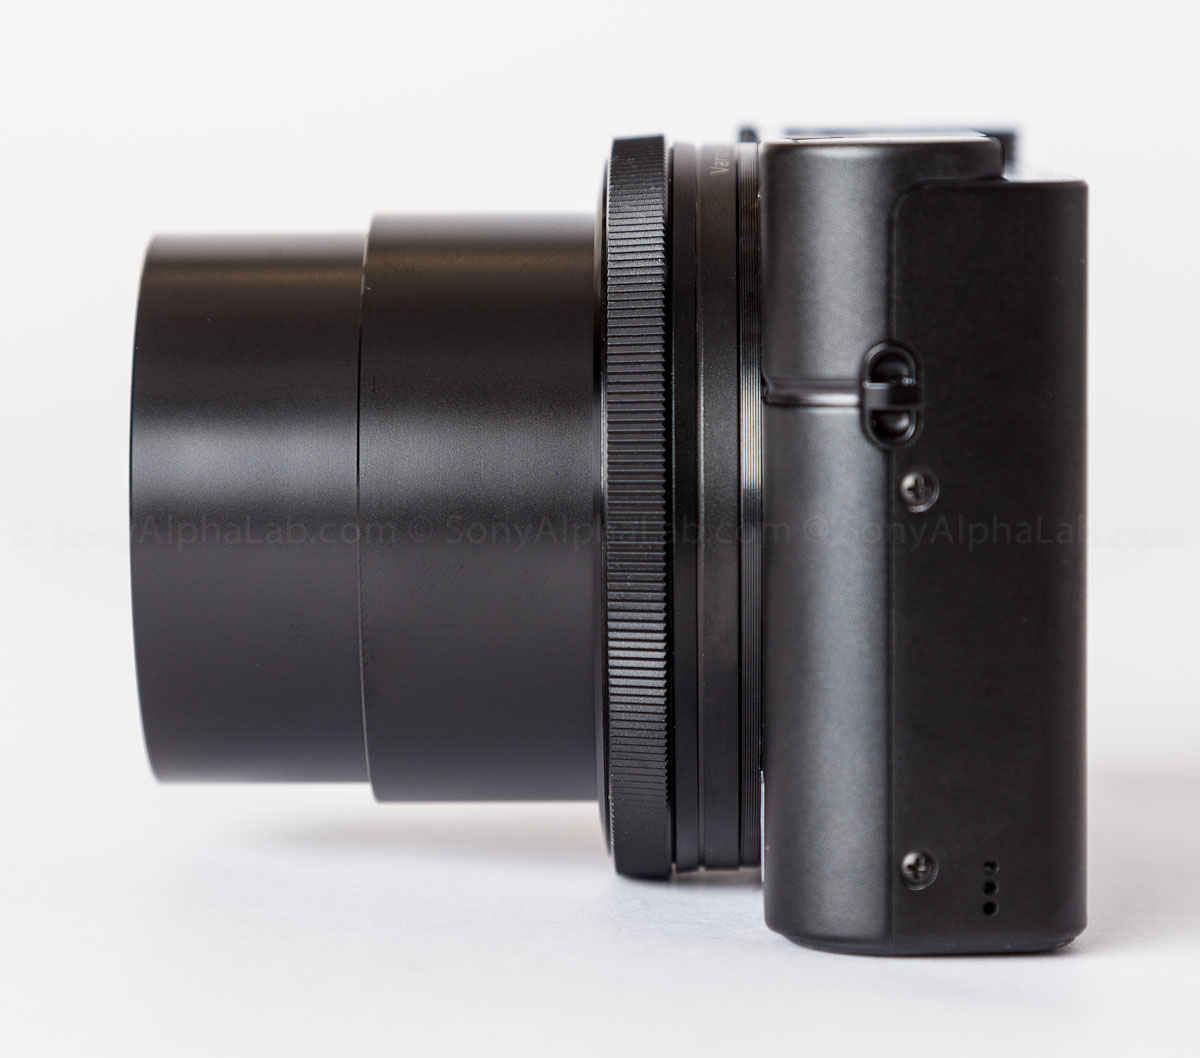 Sony Rx100 - Lens Out